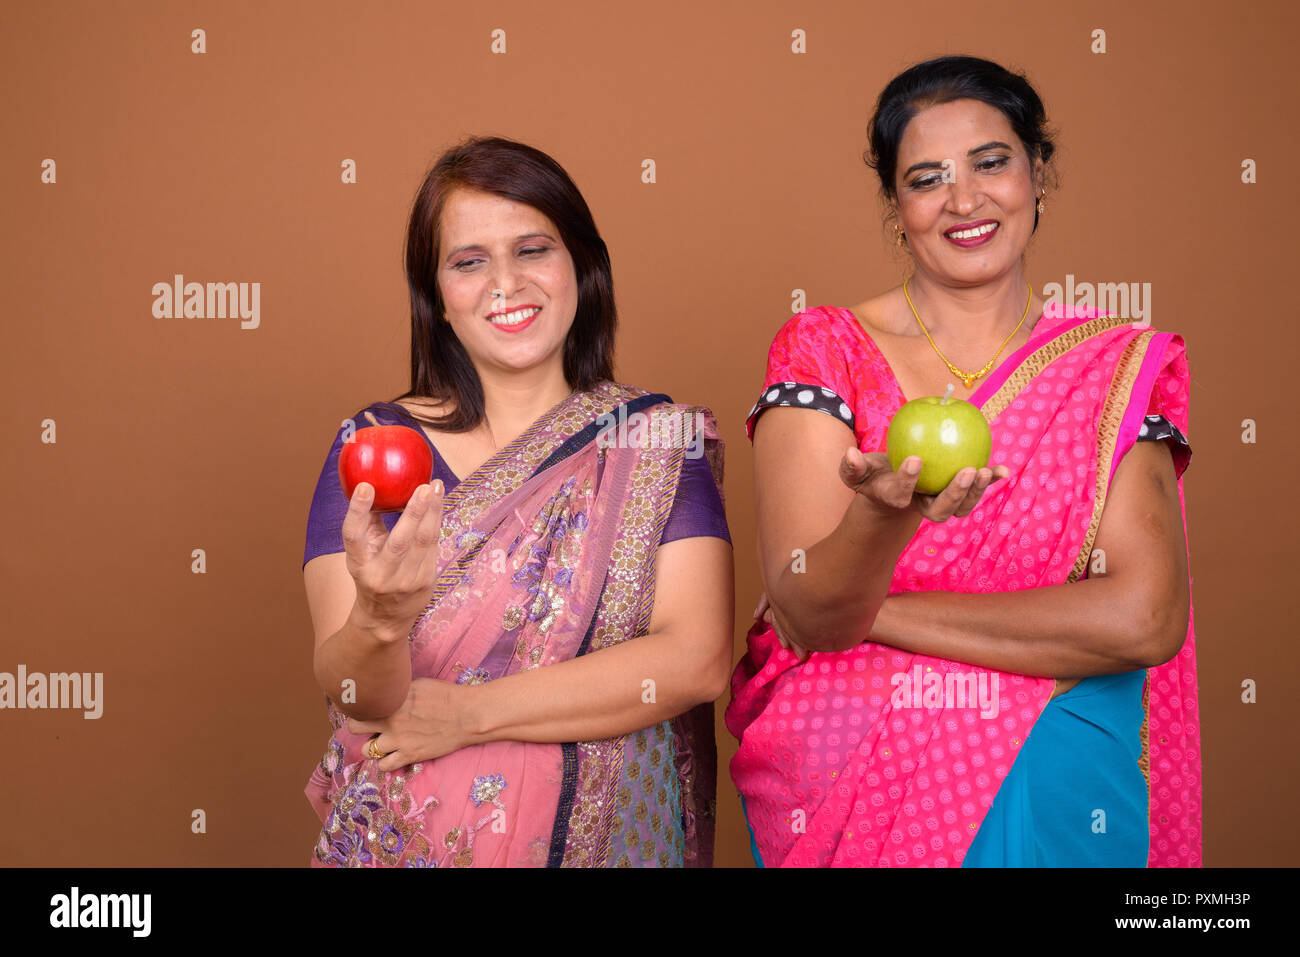 Two happy Indian woman holding healthy apple fruit Stock Photo